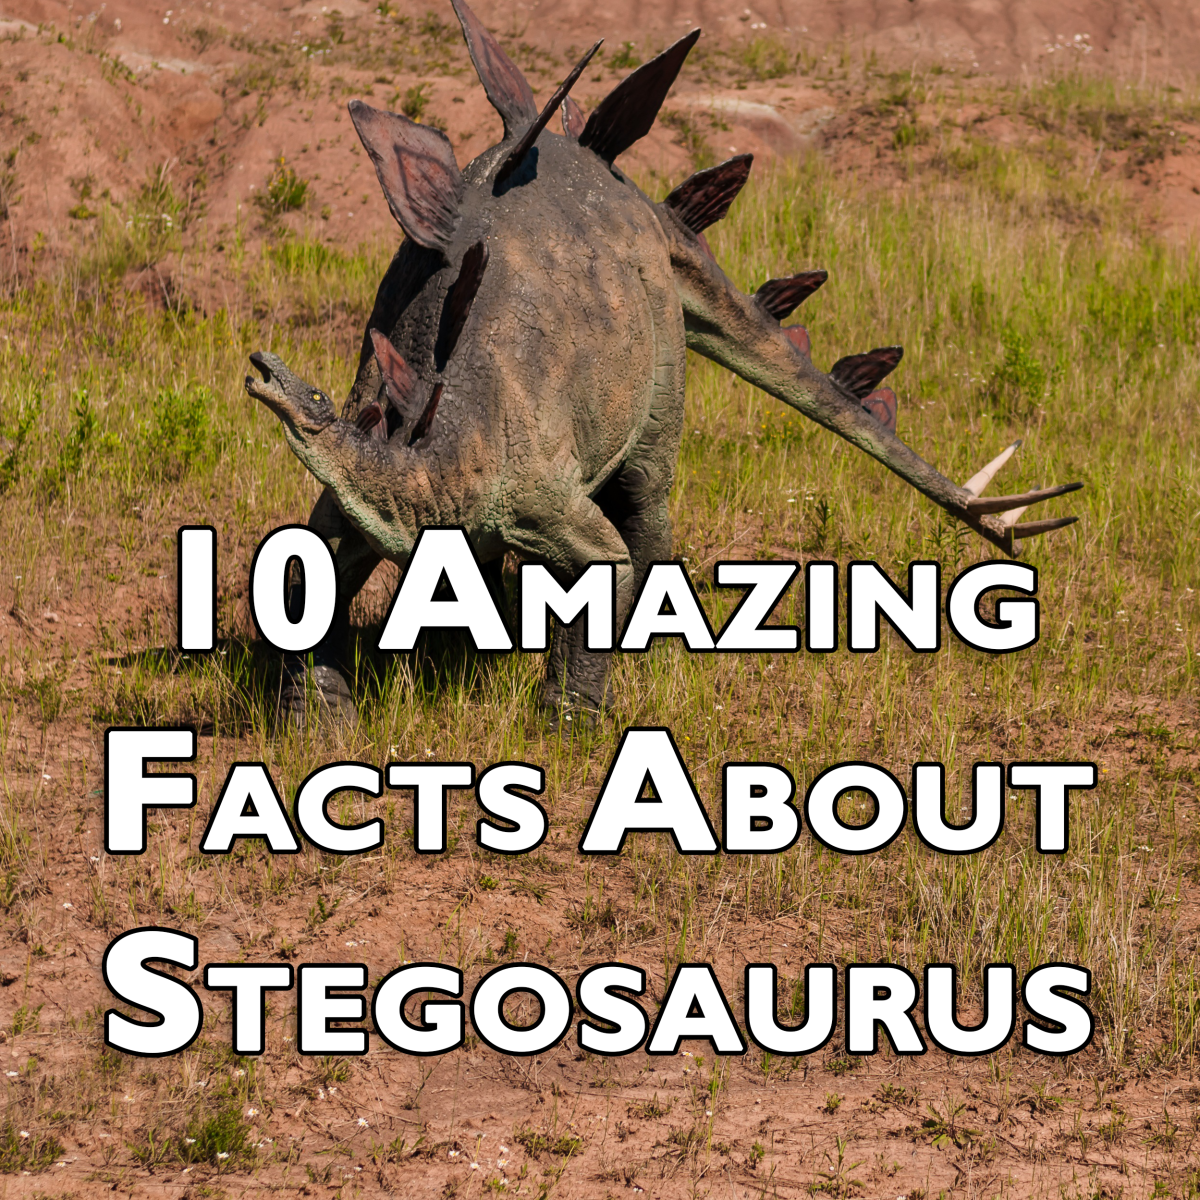 10 Amazing Facts You Probably Didn't Know About Stegosauruses